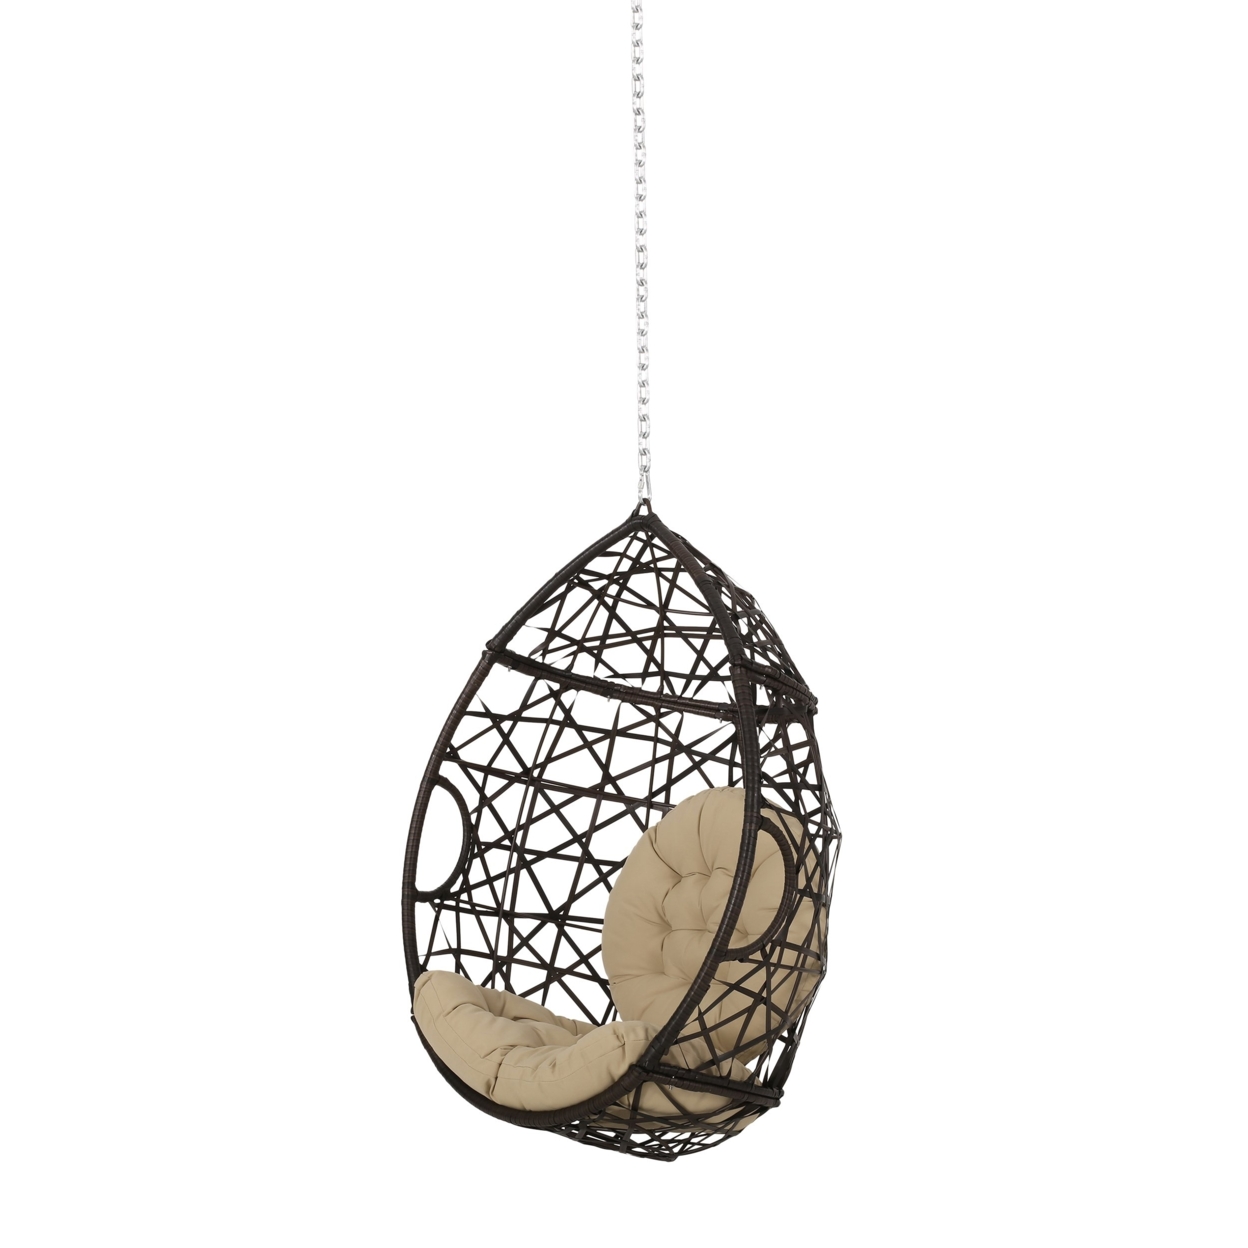 Layden Indoor/Outdoor Wicker Hanging Egg / Teardrop Chair (NO STAND) - White/white And Blue